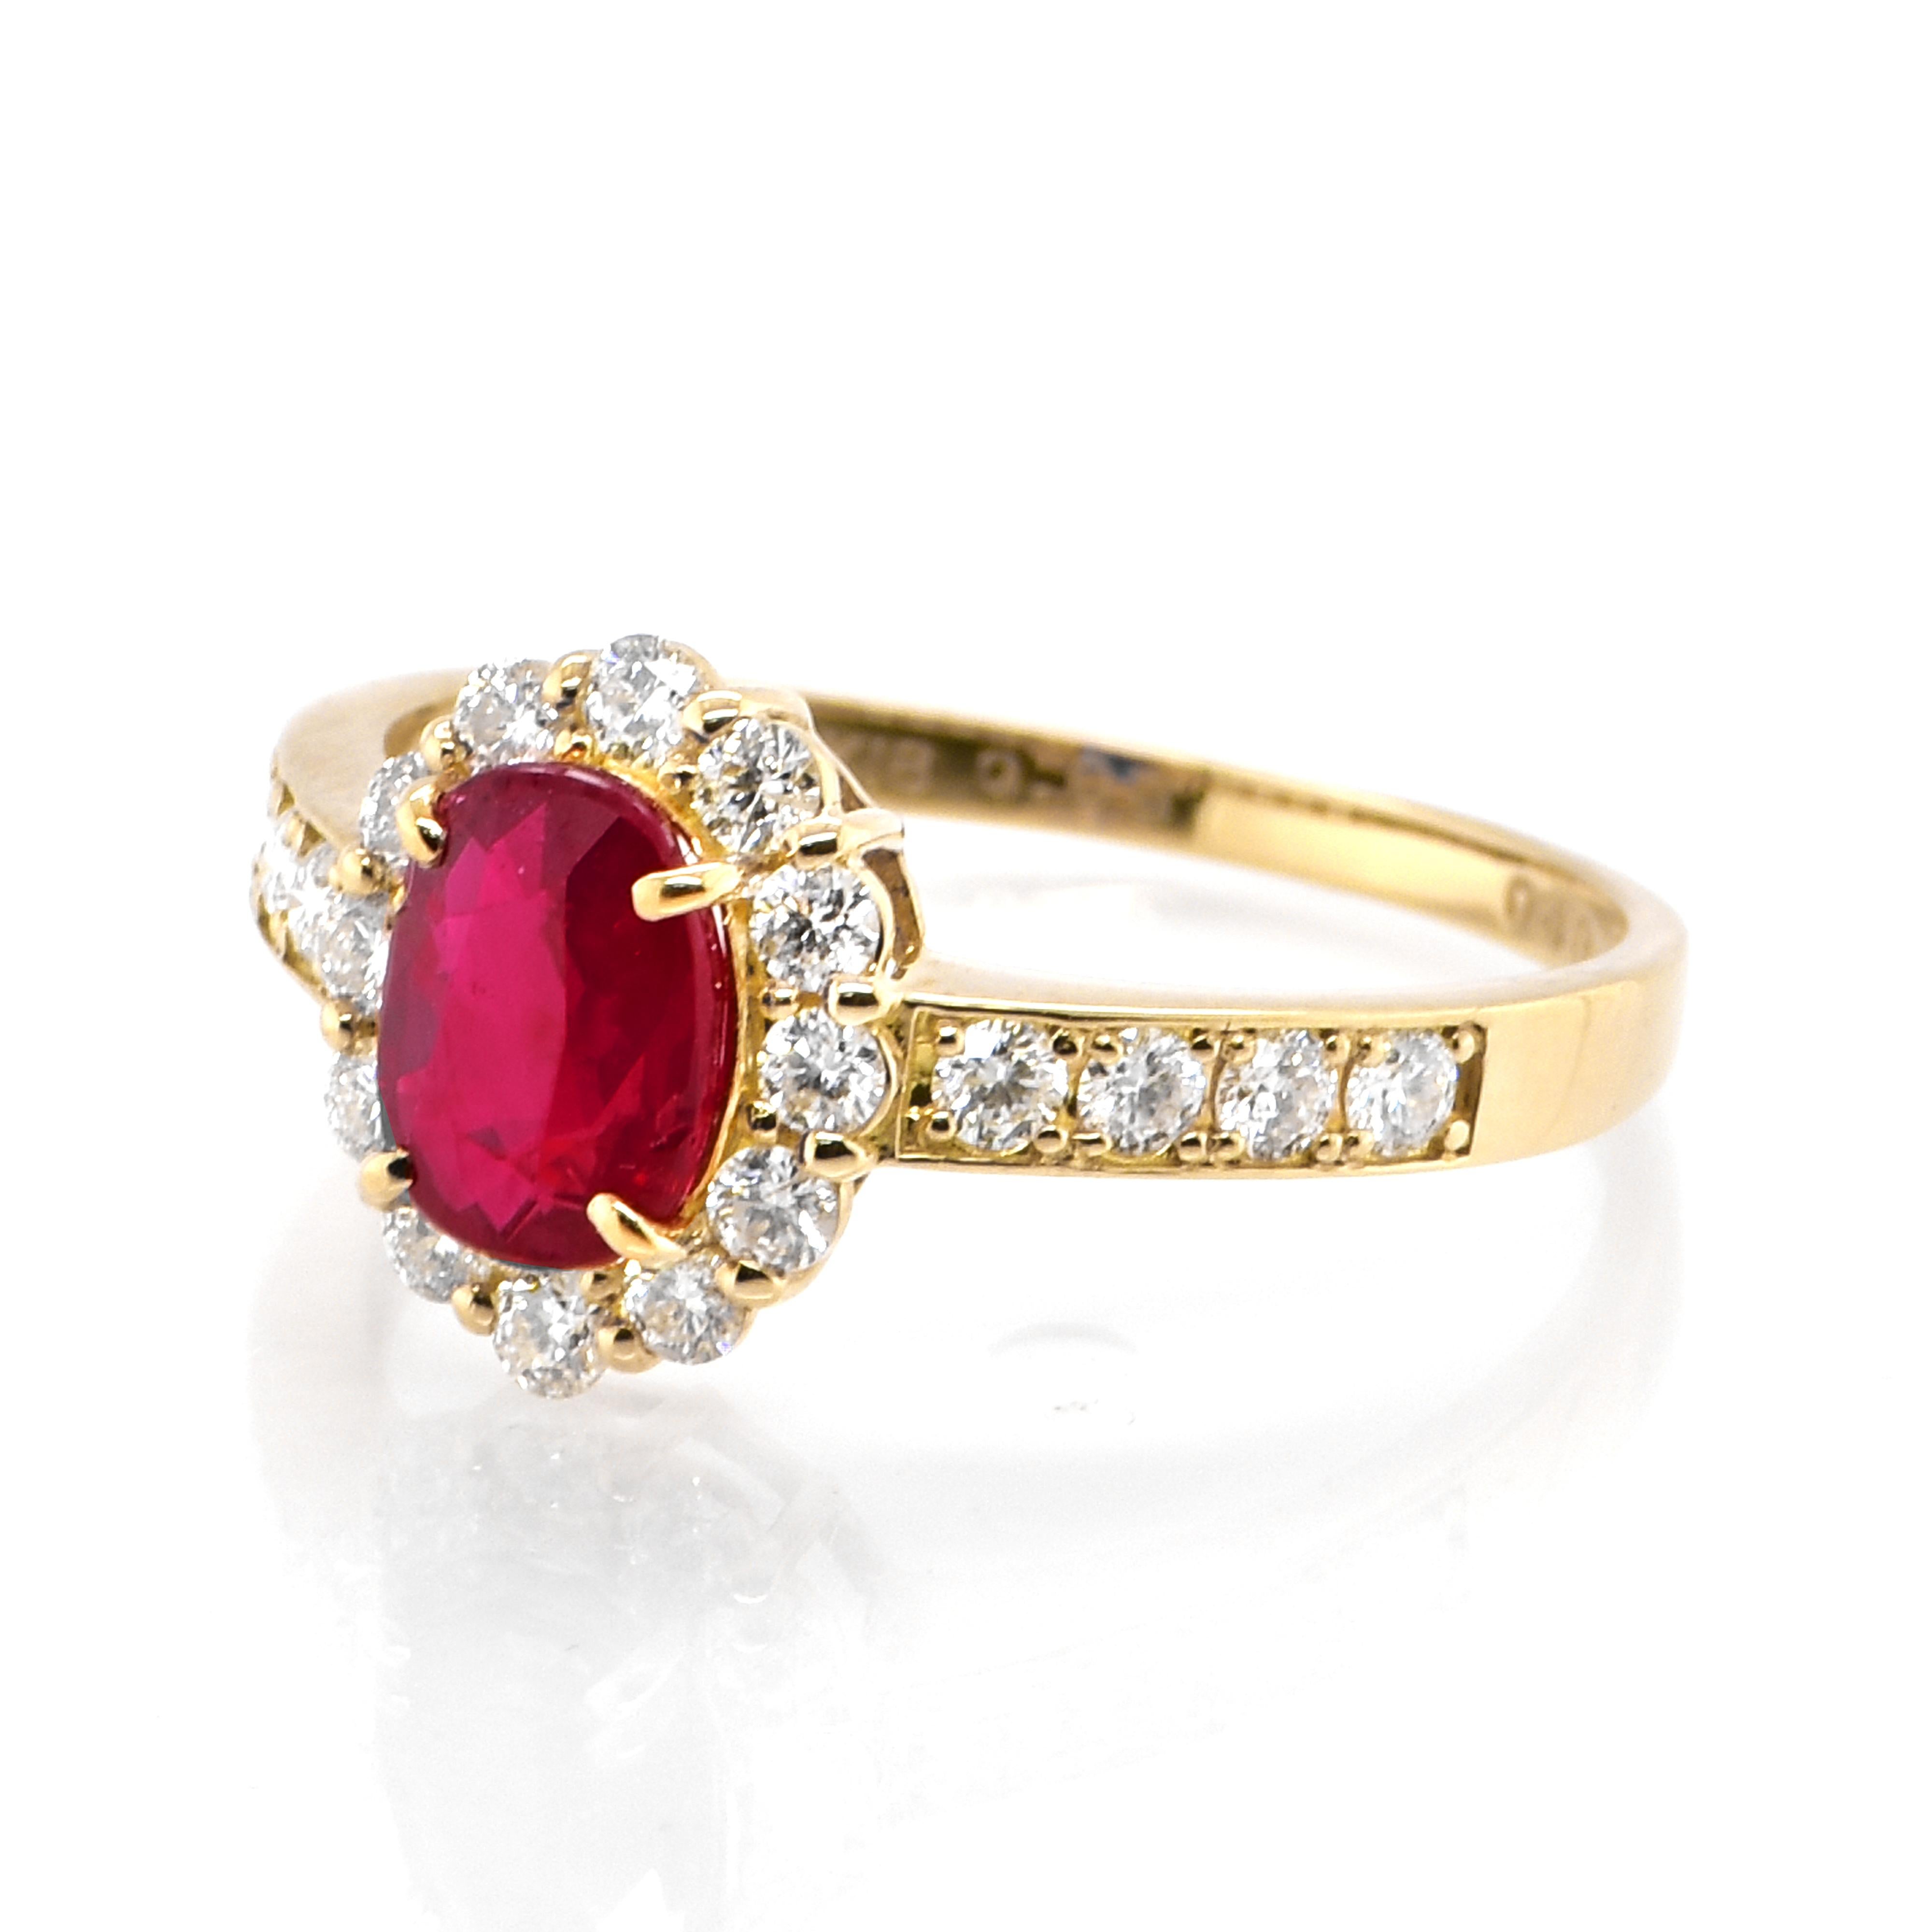 A beautiful Ring set in Platinum featuring a 0.99 Carat Natural, Pigeons Blood Red, Unheated Ruby and 0.40 Carat Diamonds. Rubies are referred to as 